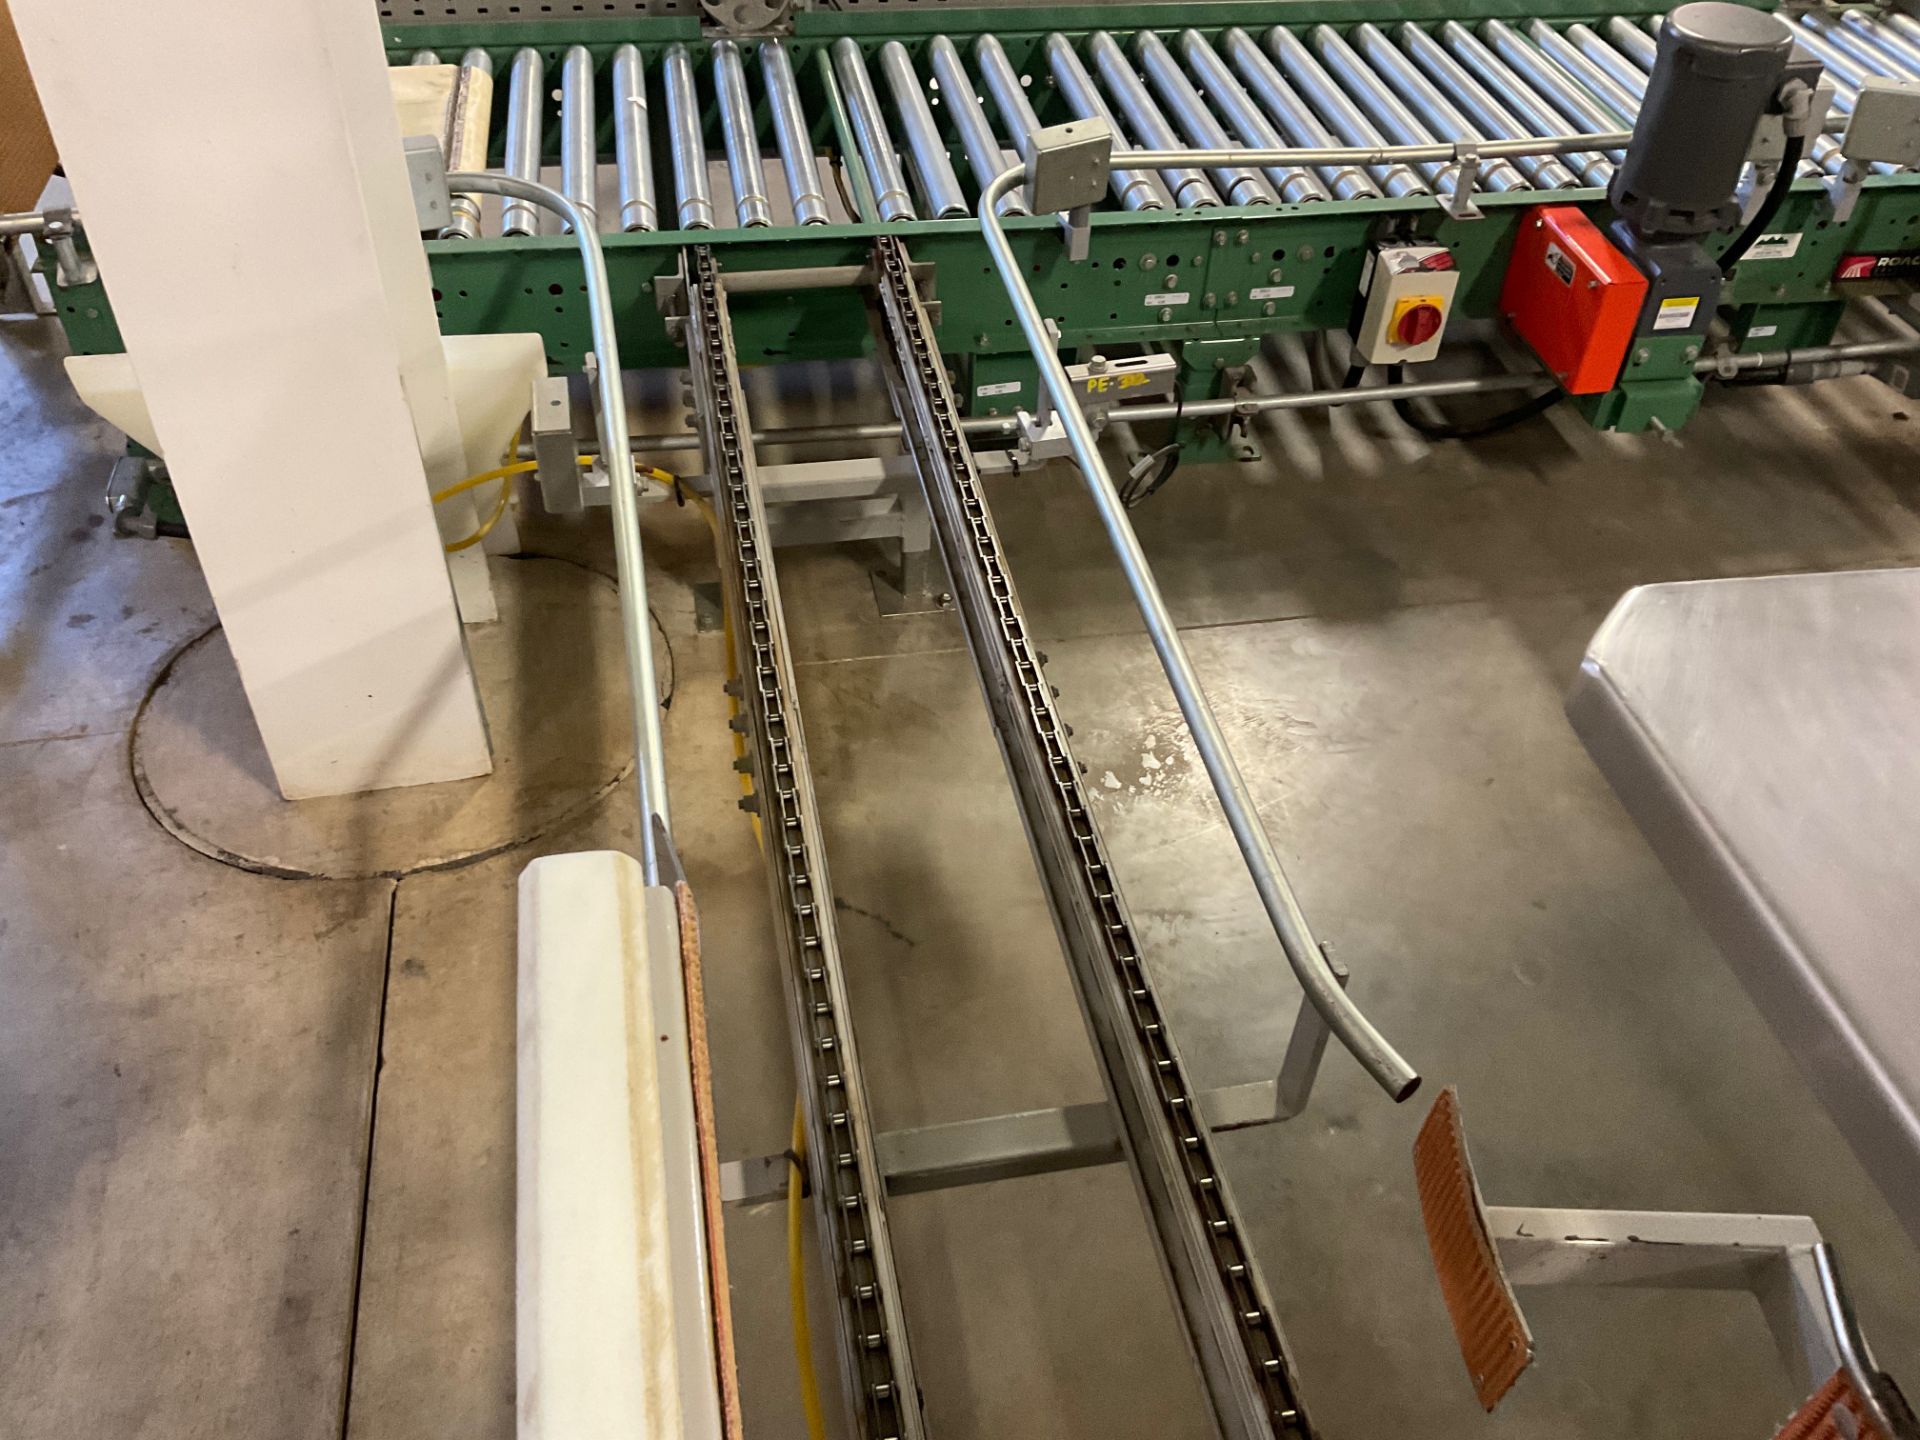 Tray Lifter & Chain Conveyor Section, Approx Dims: 20in W Belt x 7ft - Subj to Bulk | Rig Fee $300 - Image 4 of 4